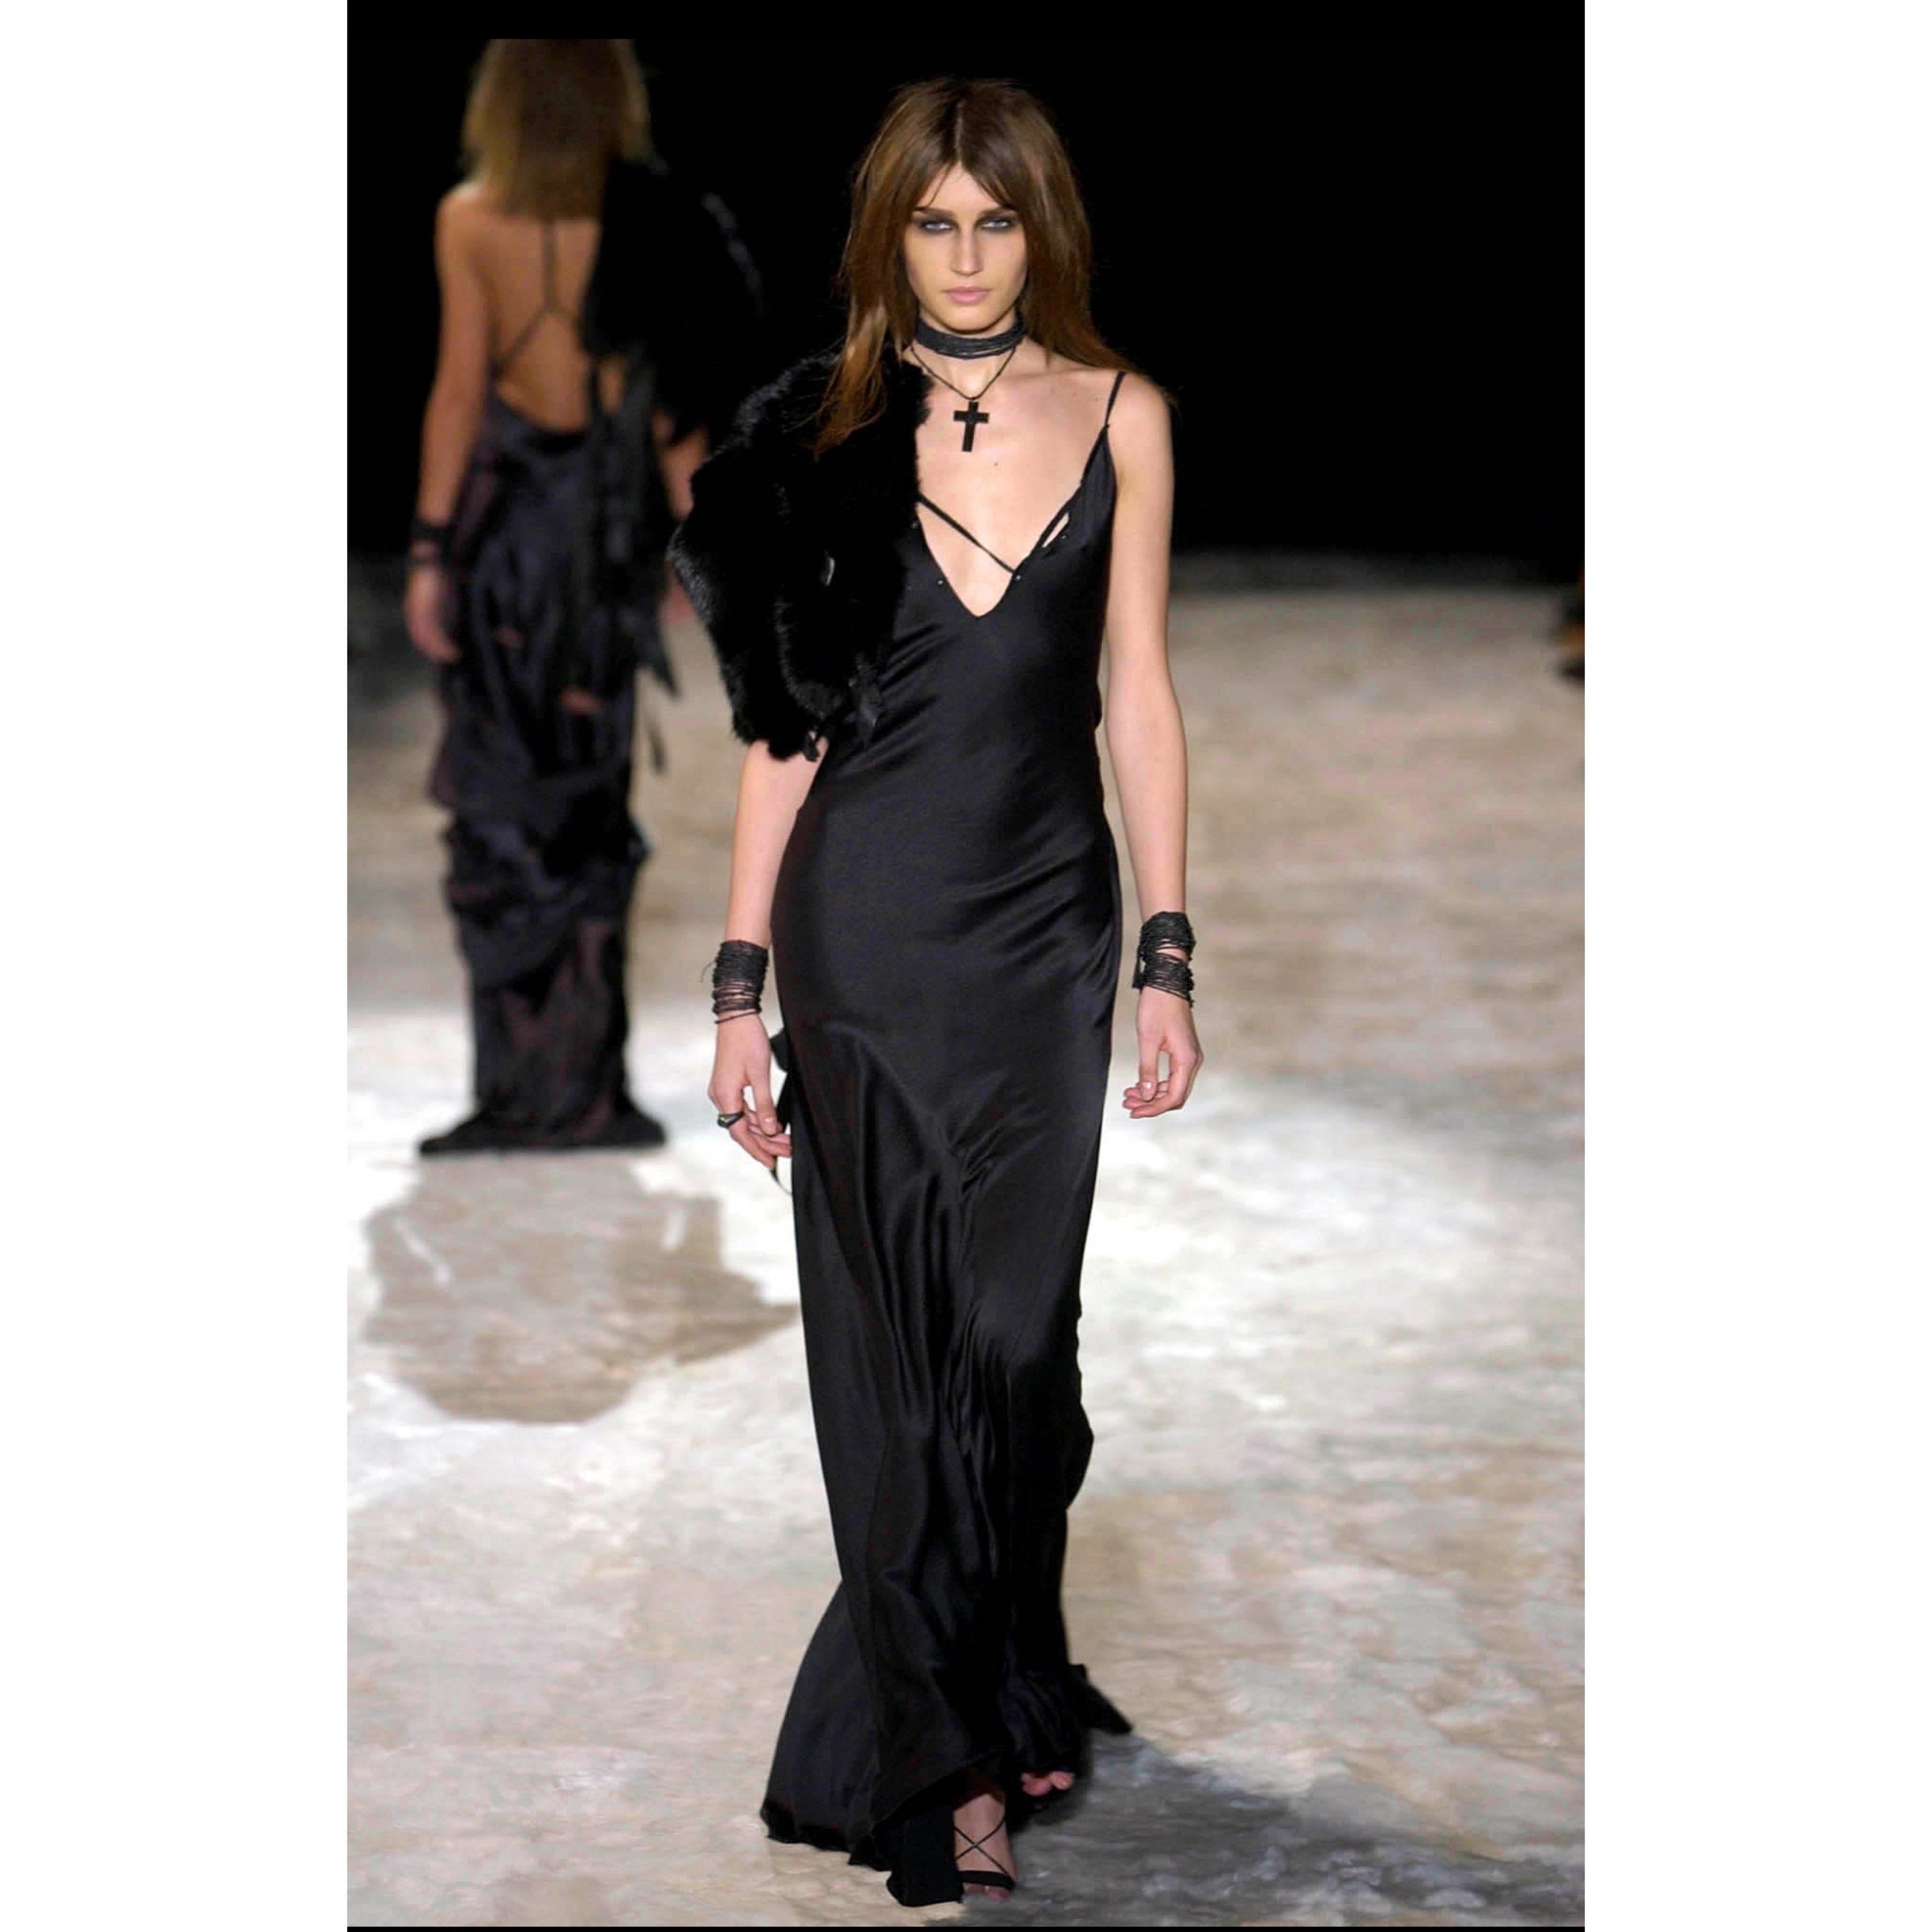 Gorgeous brand new with tags vintage TOM FORD for GUCCI fall 2002 runway finale gown ! This rare beauty that closed the runway show in 2002 laces up the back. Laces up the back, with several options. To mimic the look of the runway, you can pull the